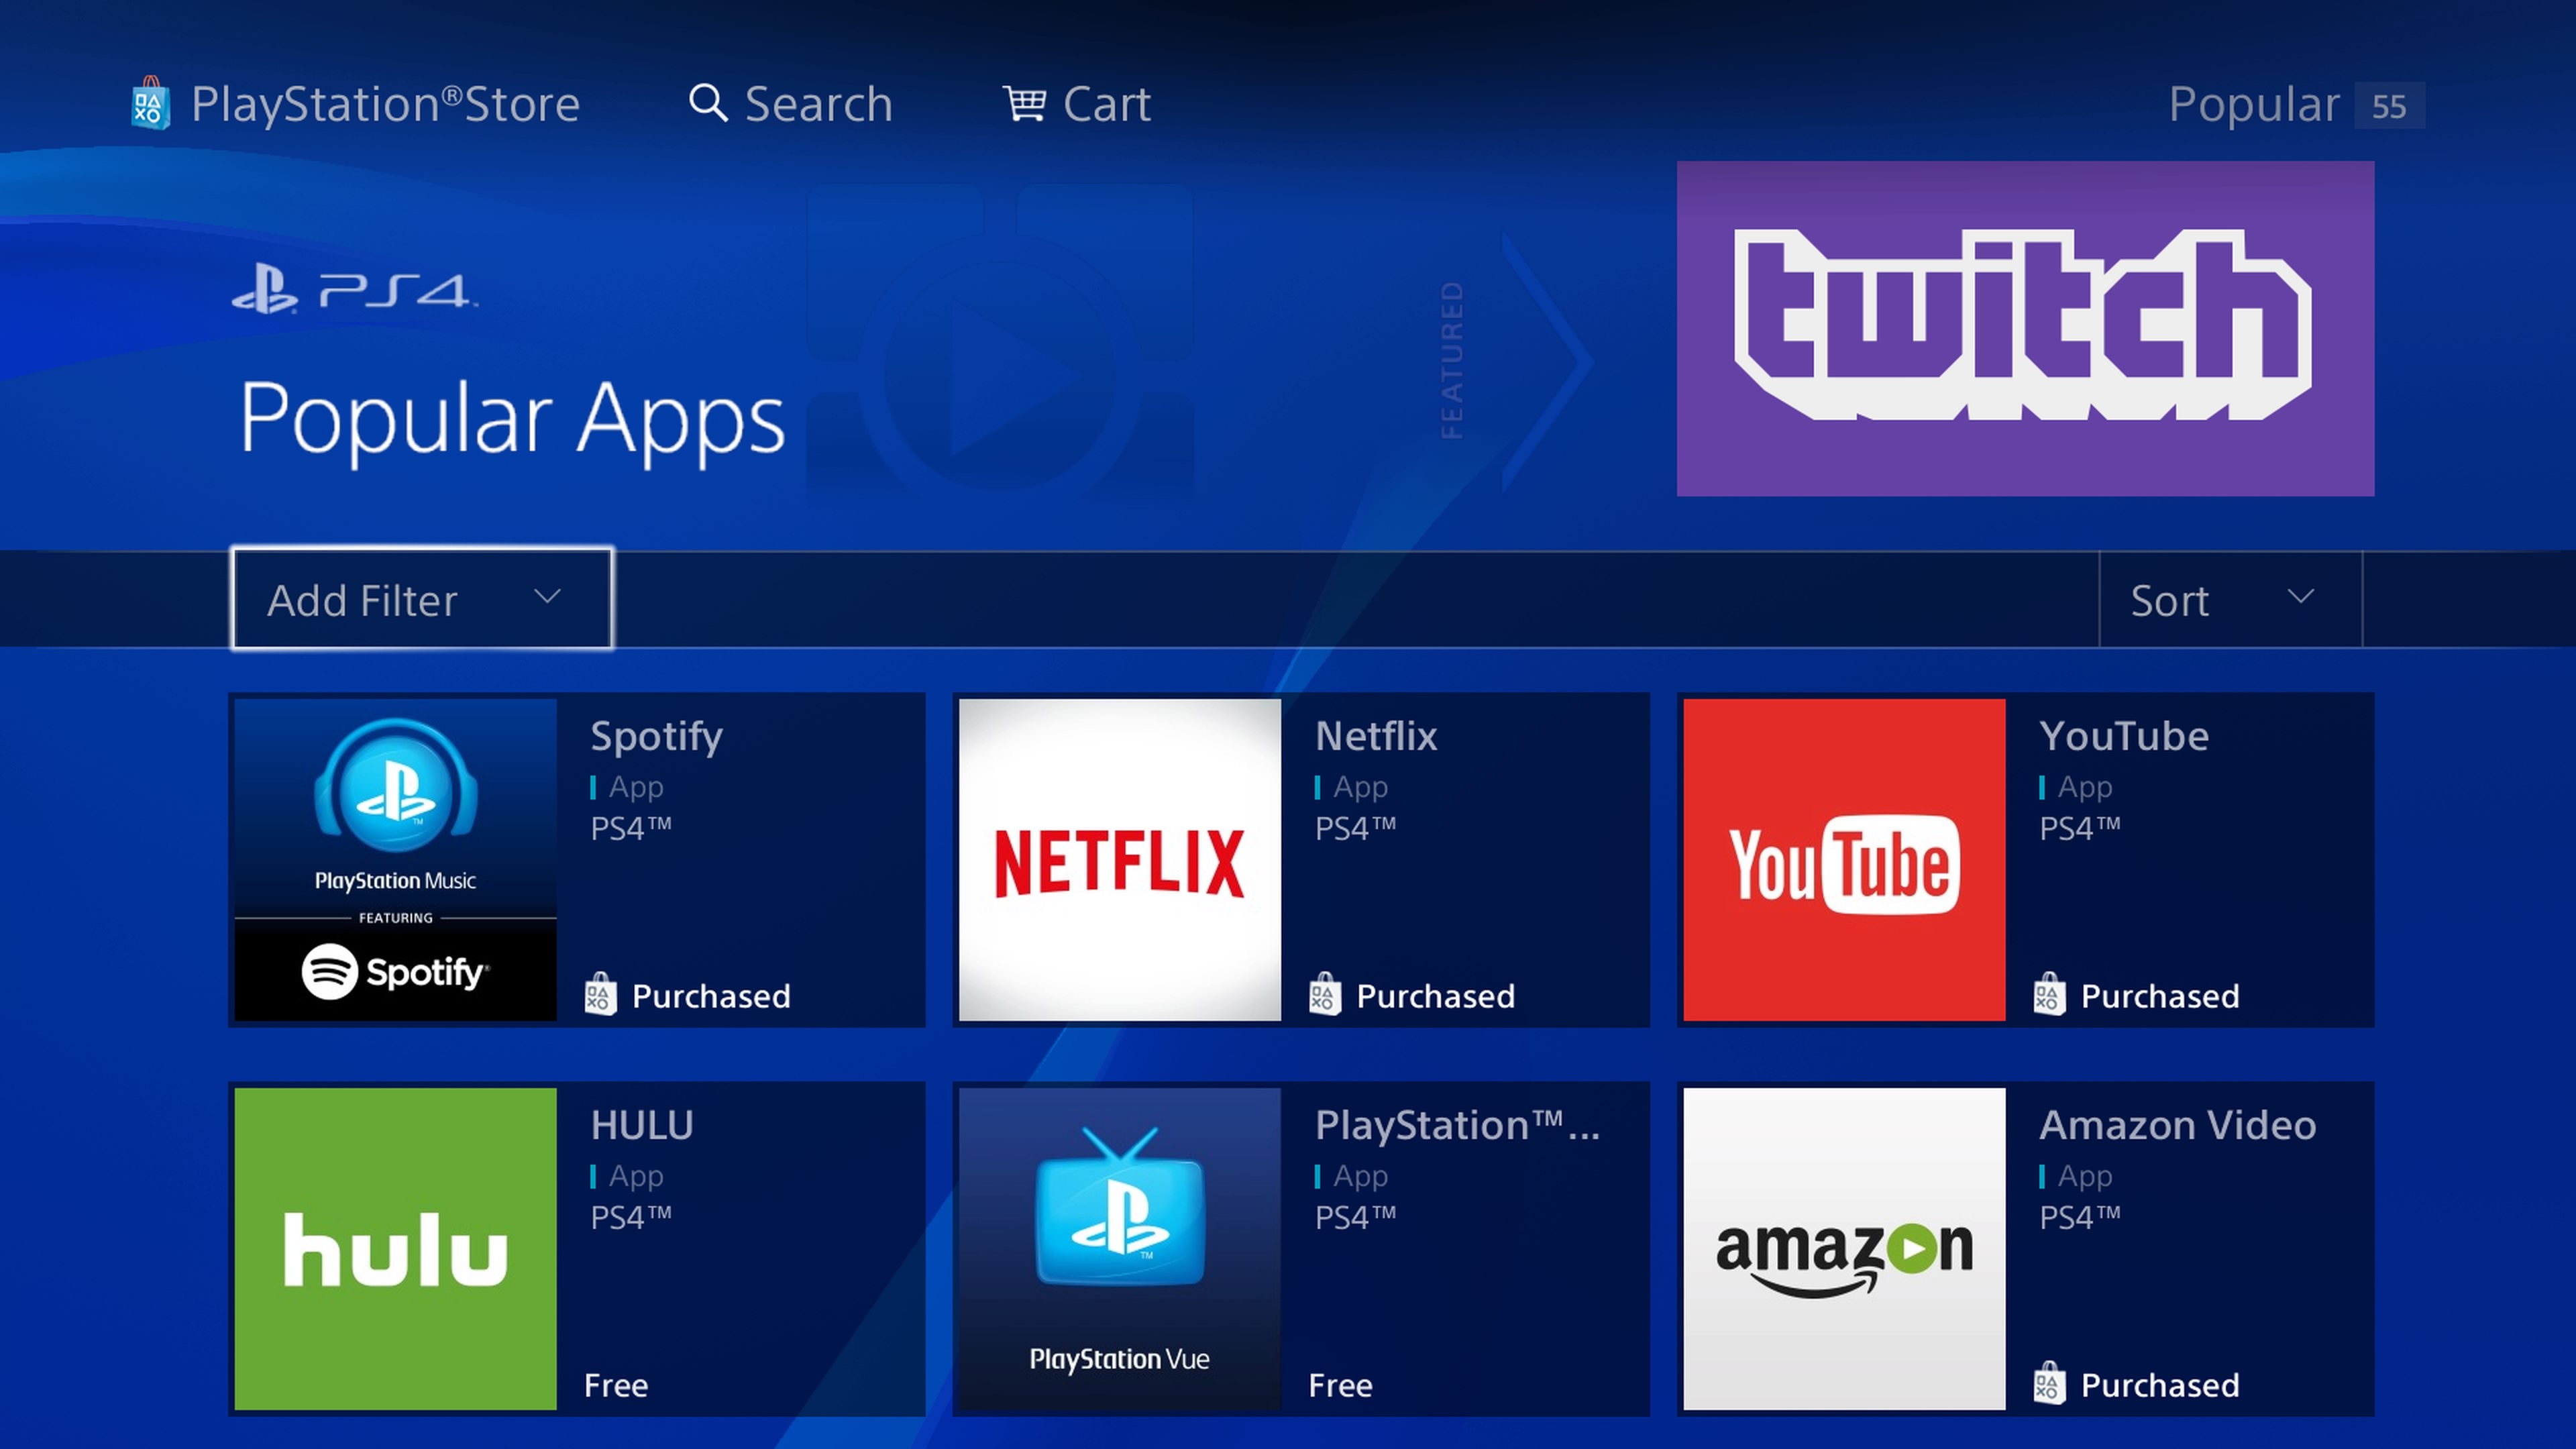 PS4 video streaming services